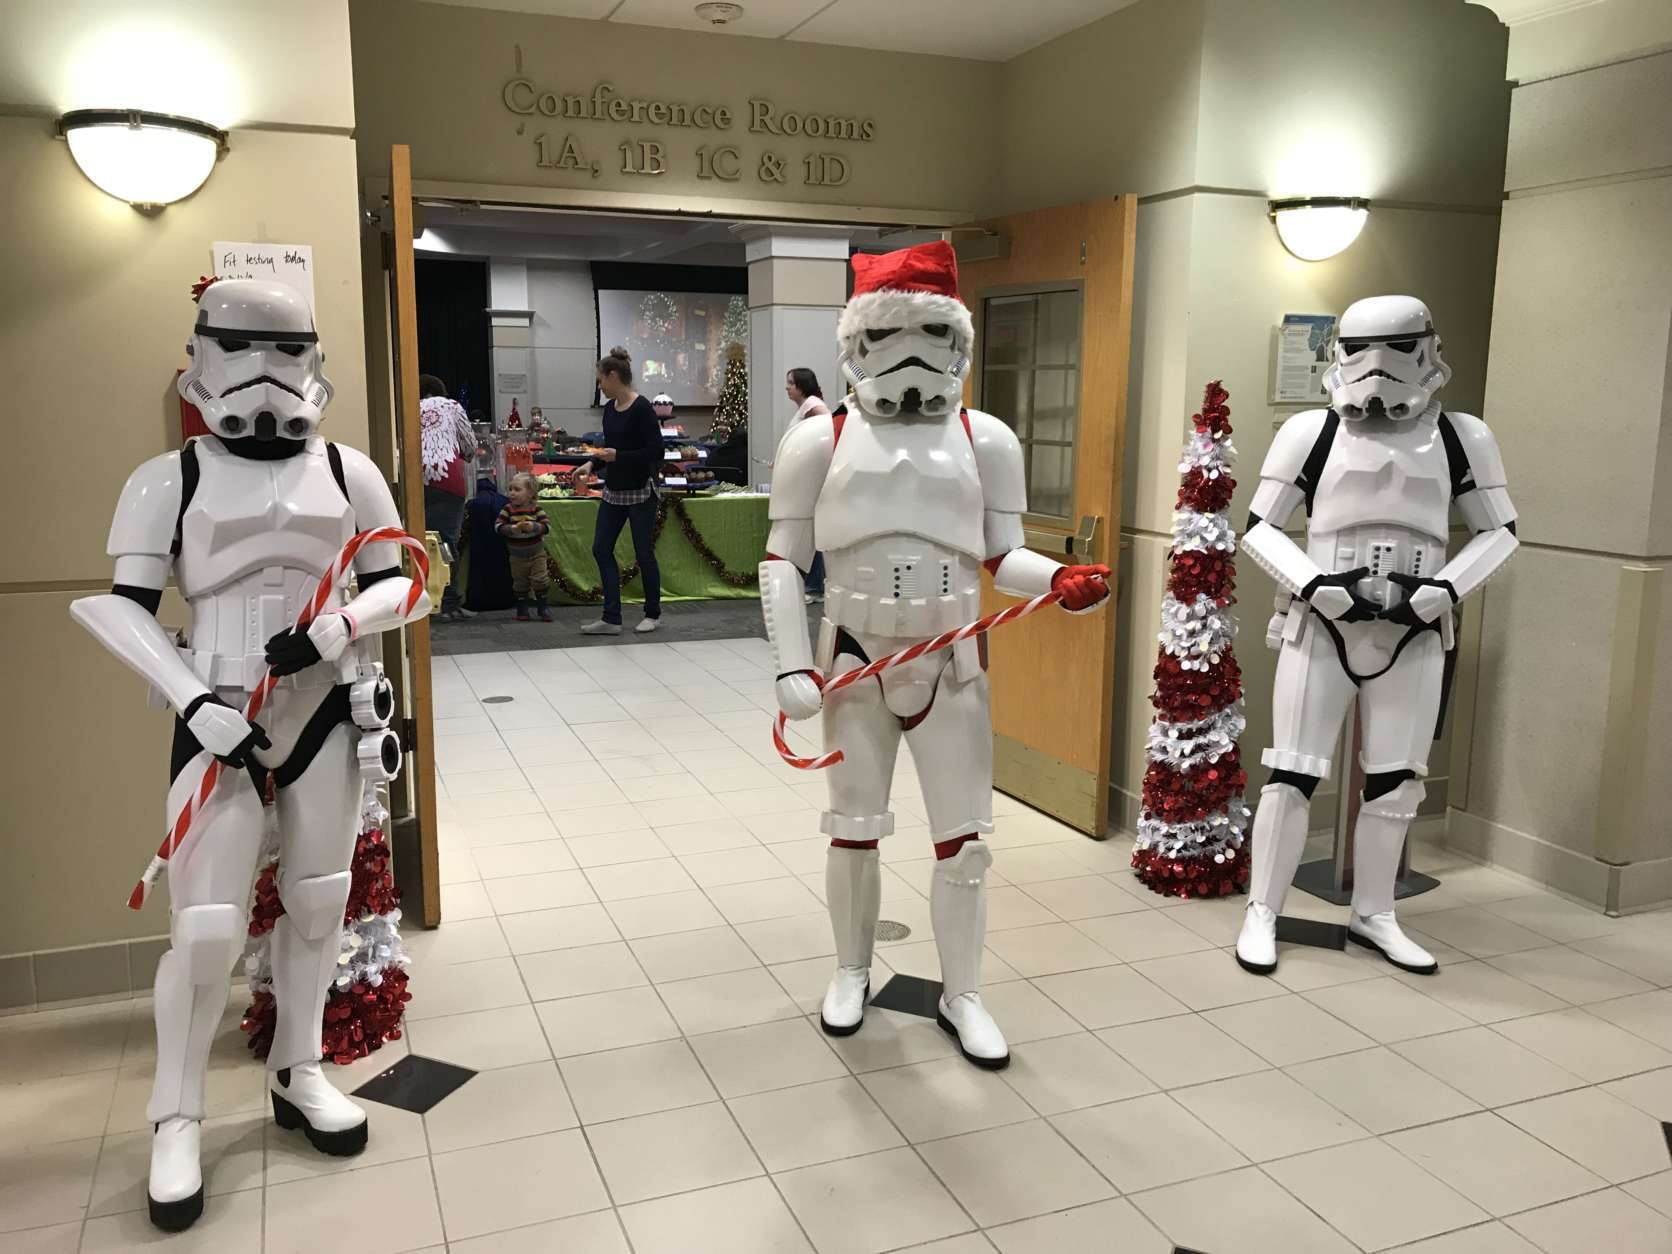 Three Stormtroopers guard a doorway at the party. A few came armed with giant candy canes in place of blasters.
 (WTOP/Michelle Basch)